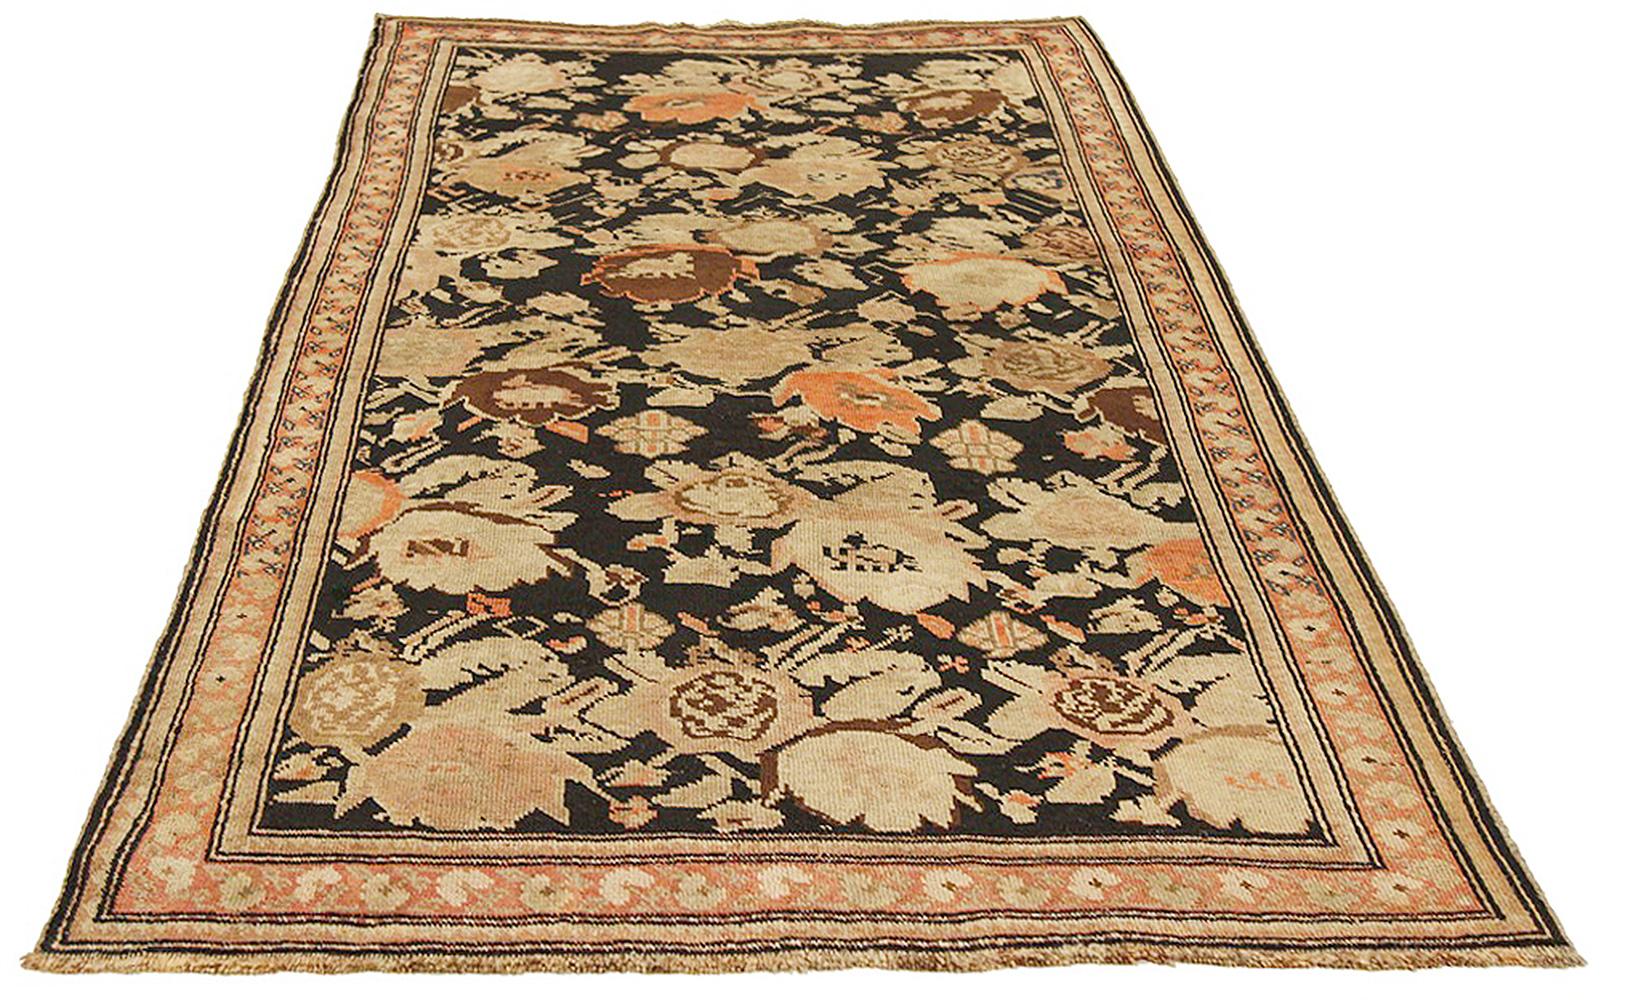 Antique Persian rug handwoven from the finest sheep’s wool and colored with all-natural vegetable dyes that are safe for humans and pets. It’s a traditional Karabagh design featuring a colorful cow figure over a red and pink field. It’s an elegant